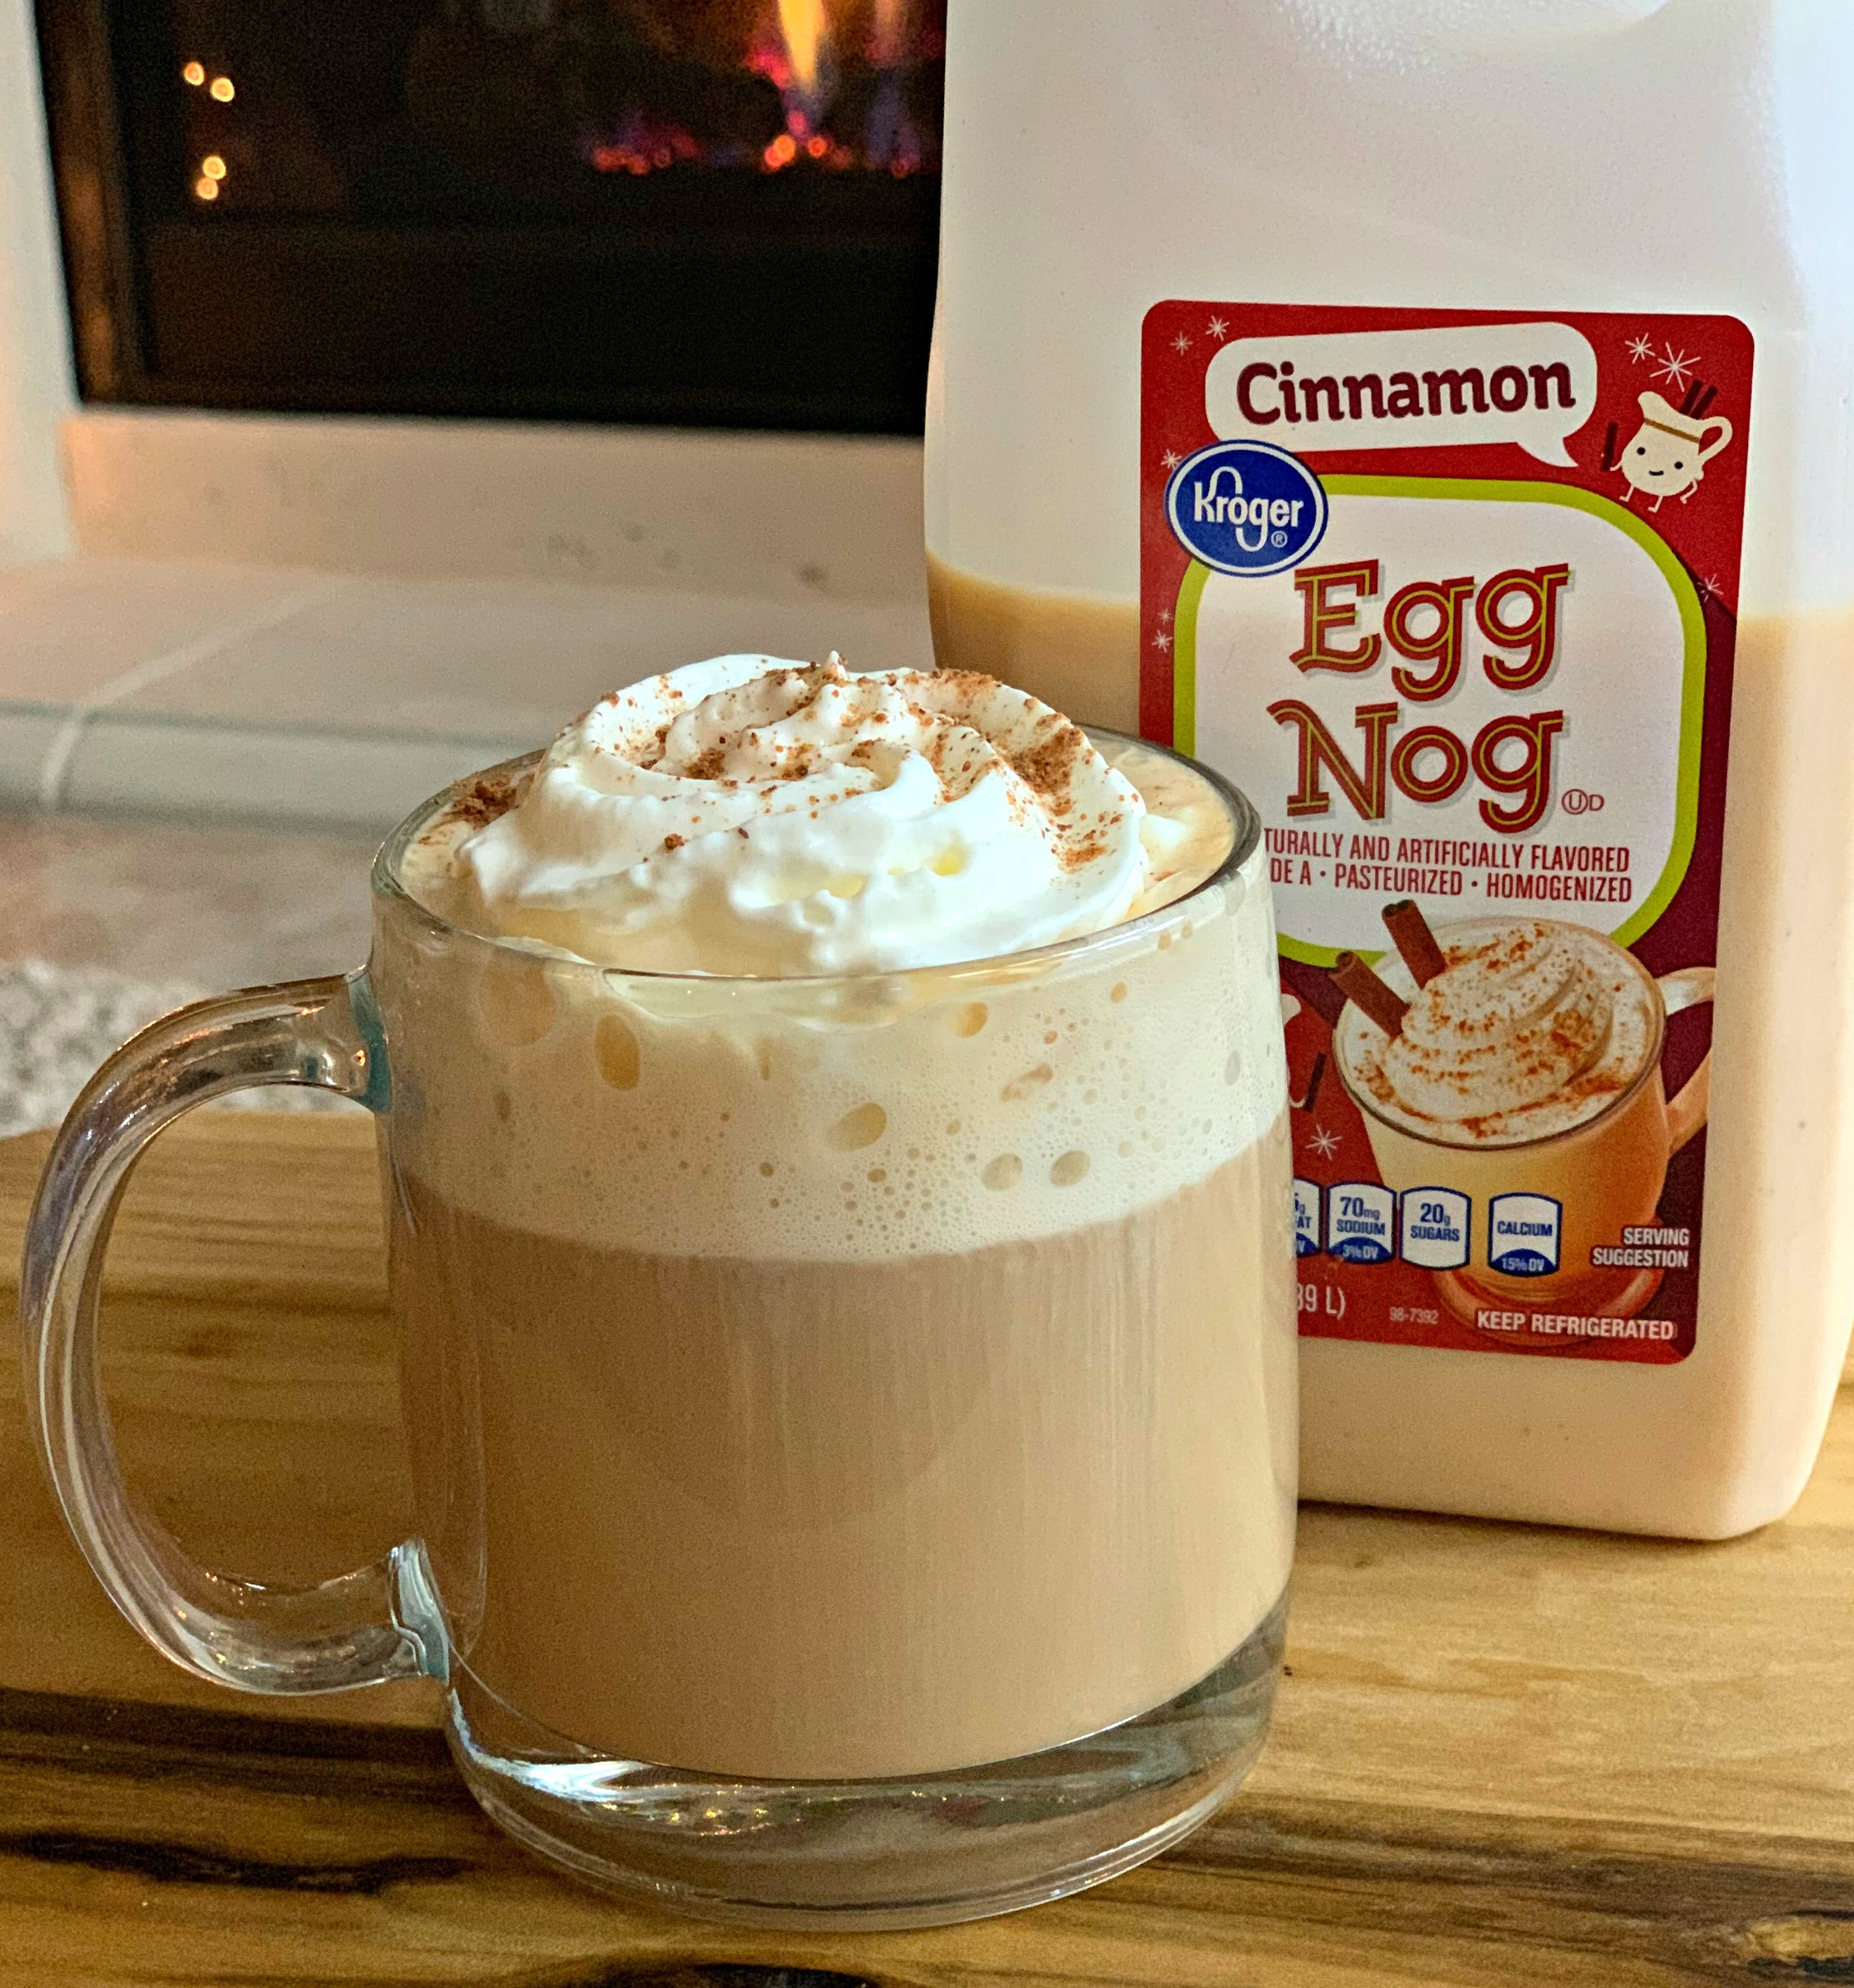 Eggnog and Coffee Lovely Spiced Cinnamon Eggnog Coffee the Cookin Chicks